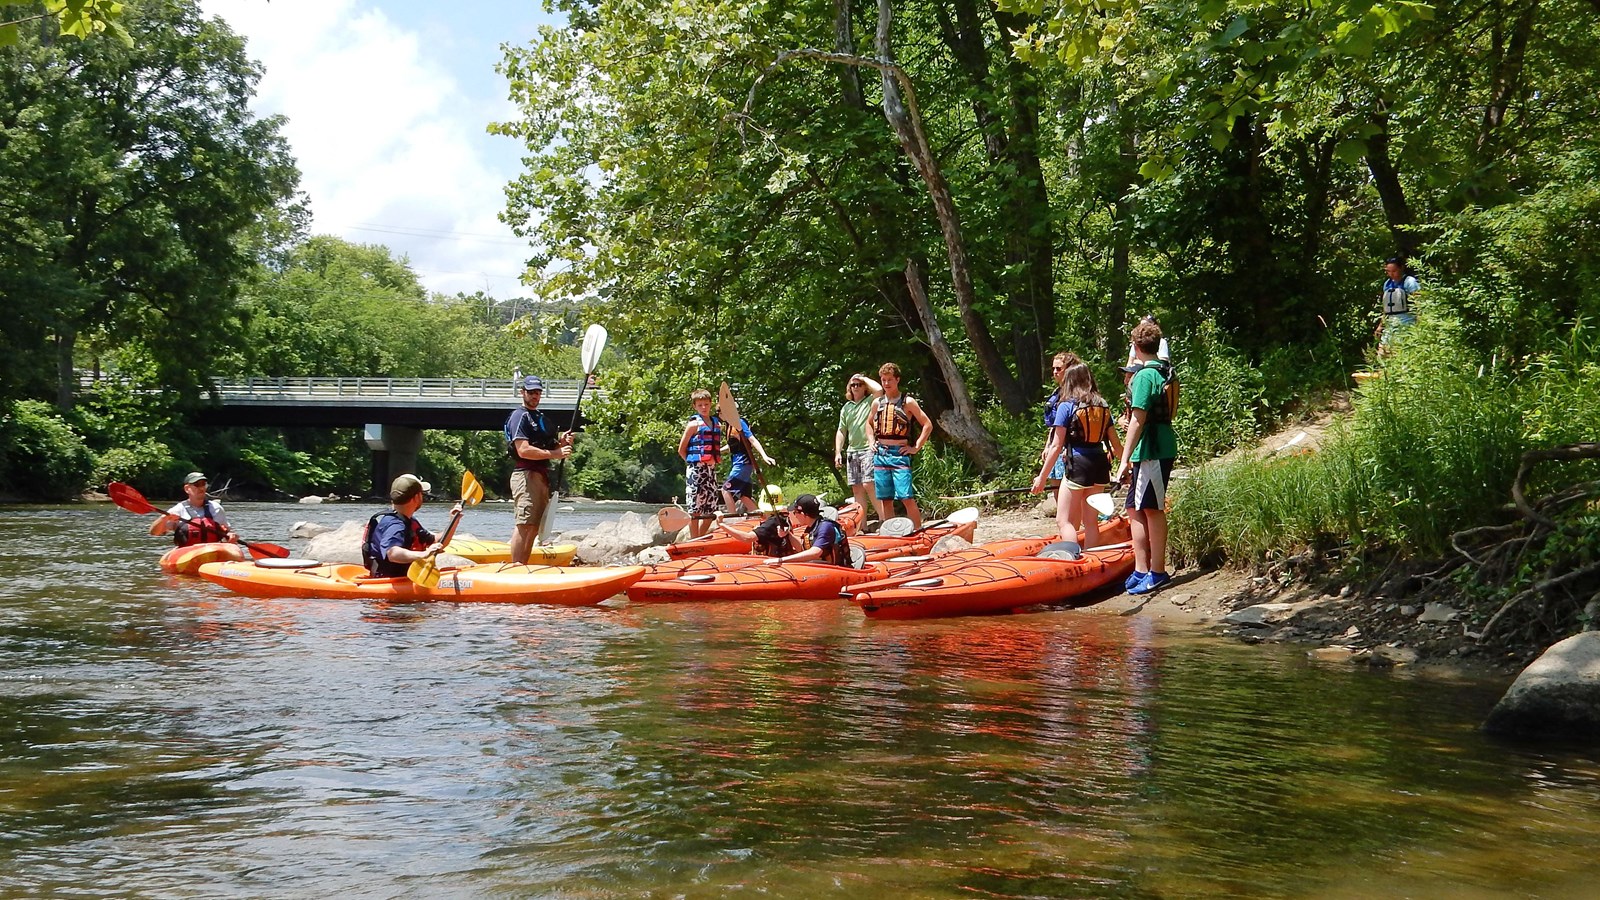 A group of paddlers launches their canoes into the Cuyahoga River.